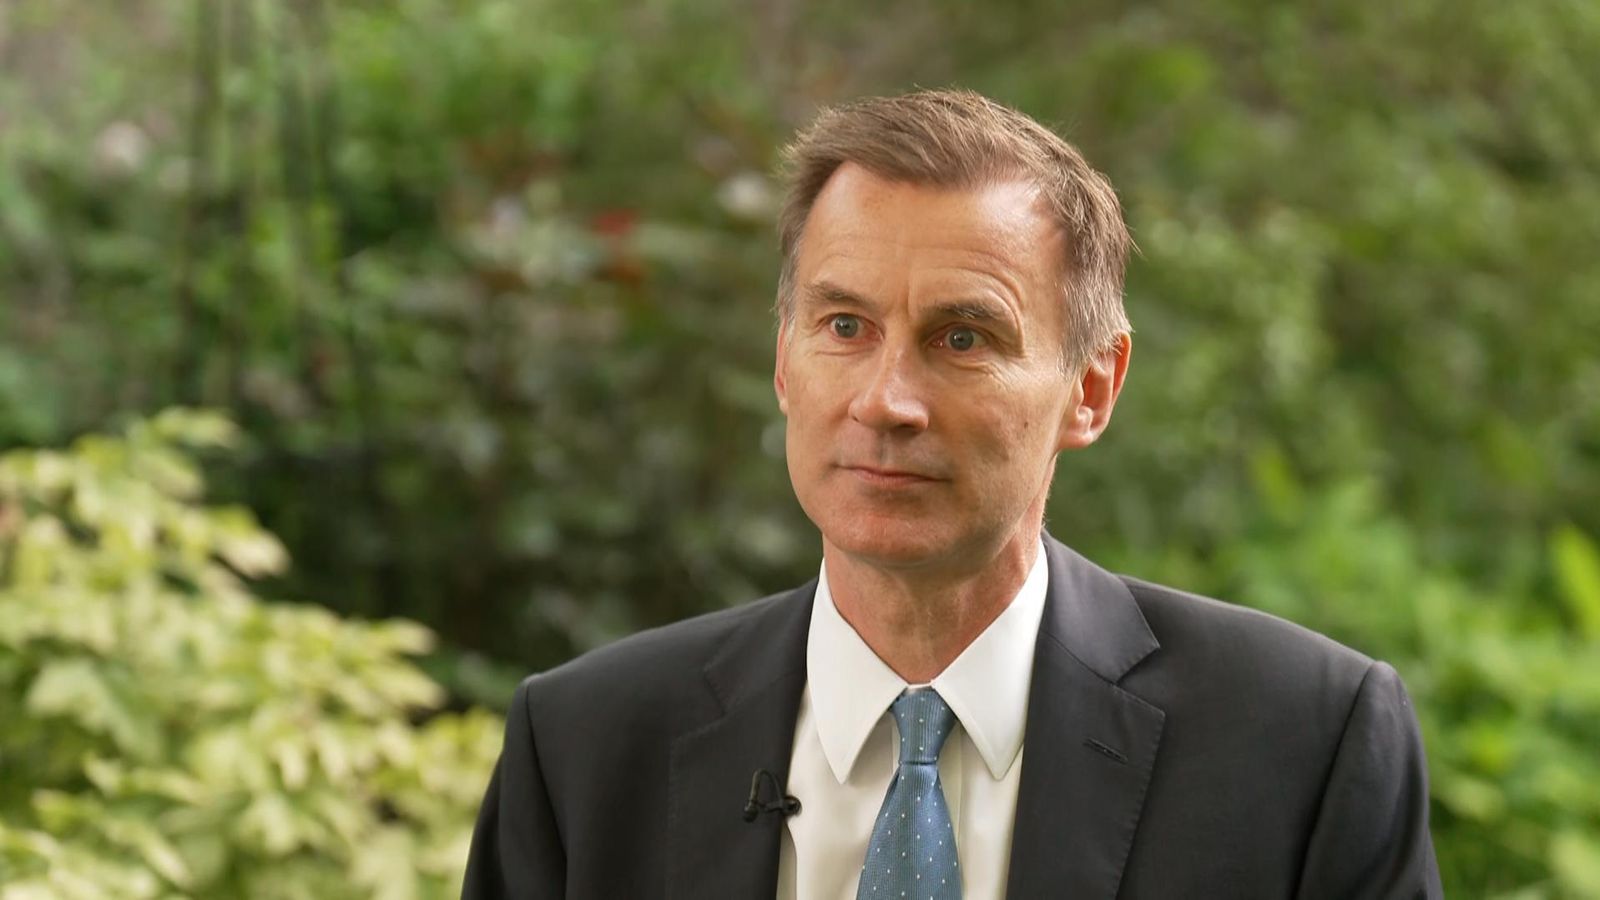 Jeremy Hunt to hold pension fund talks as major reforms loom